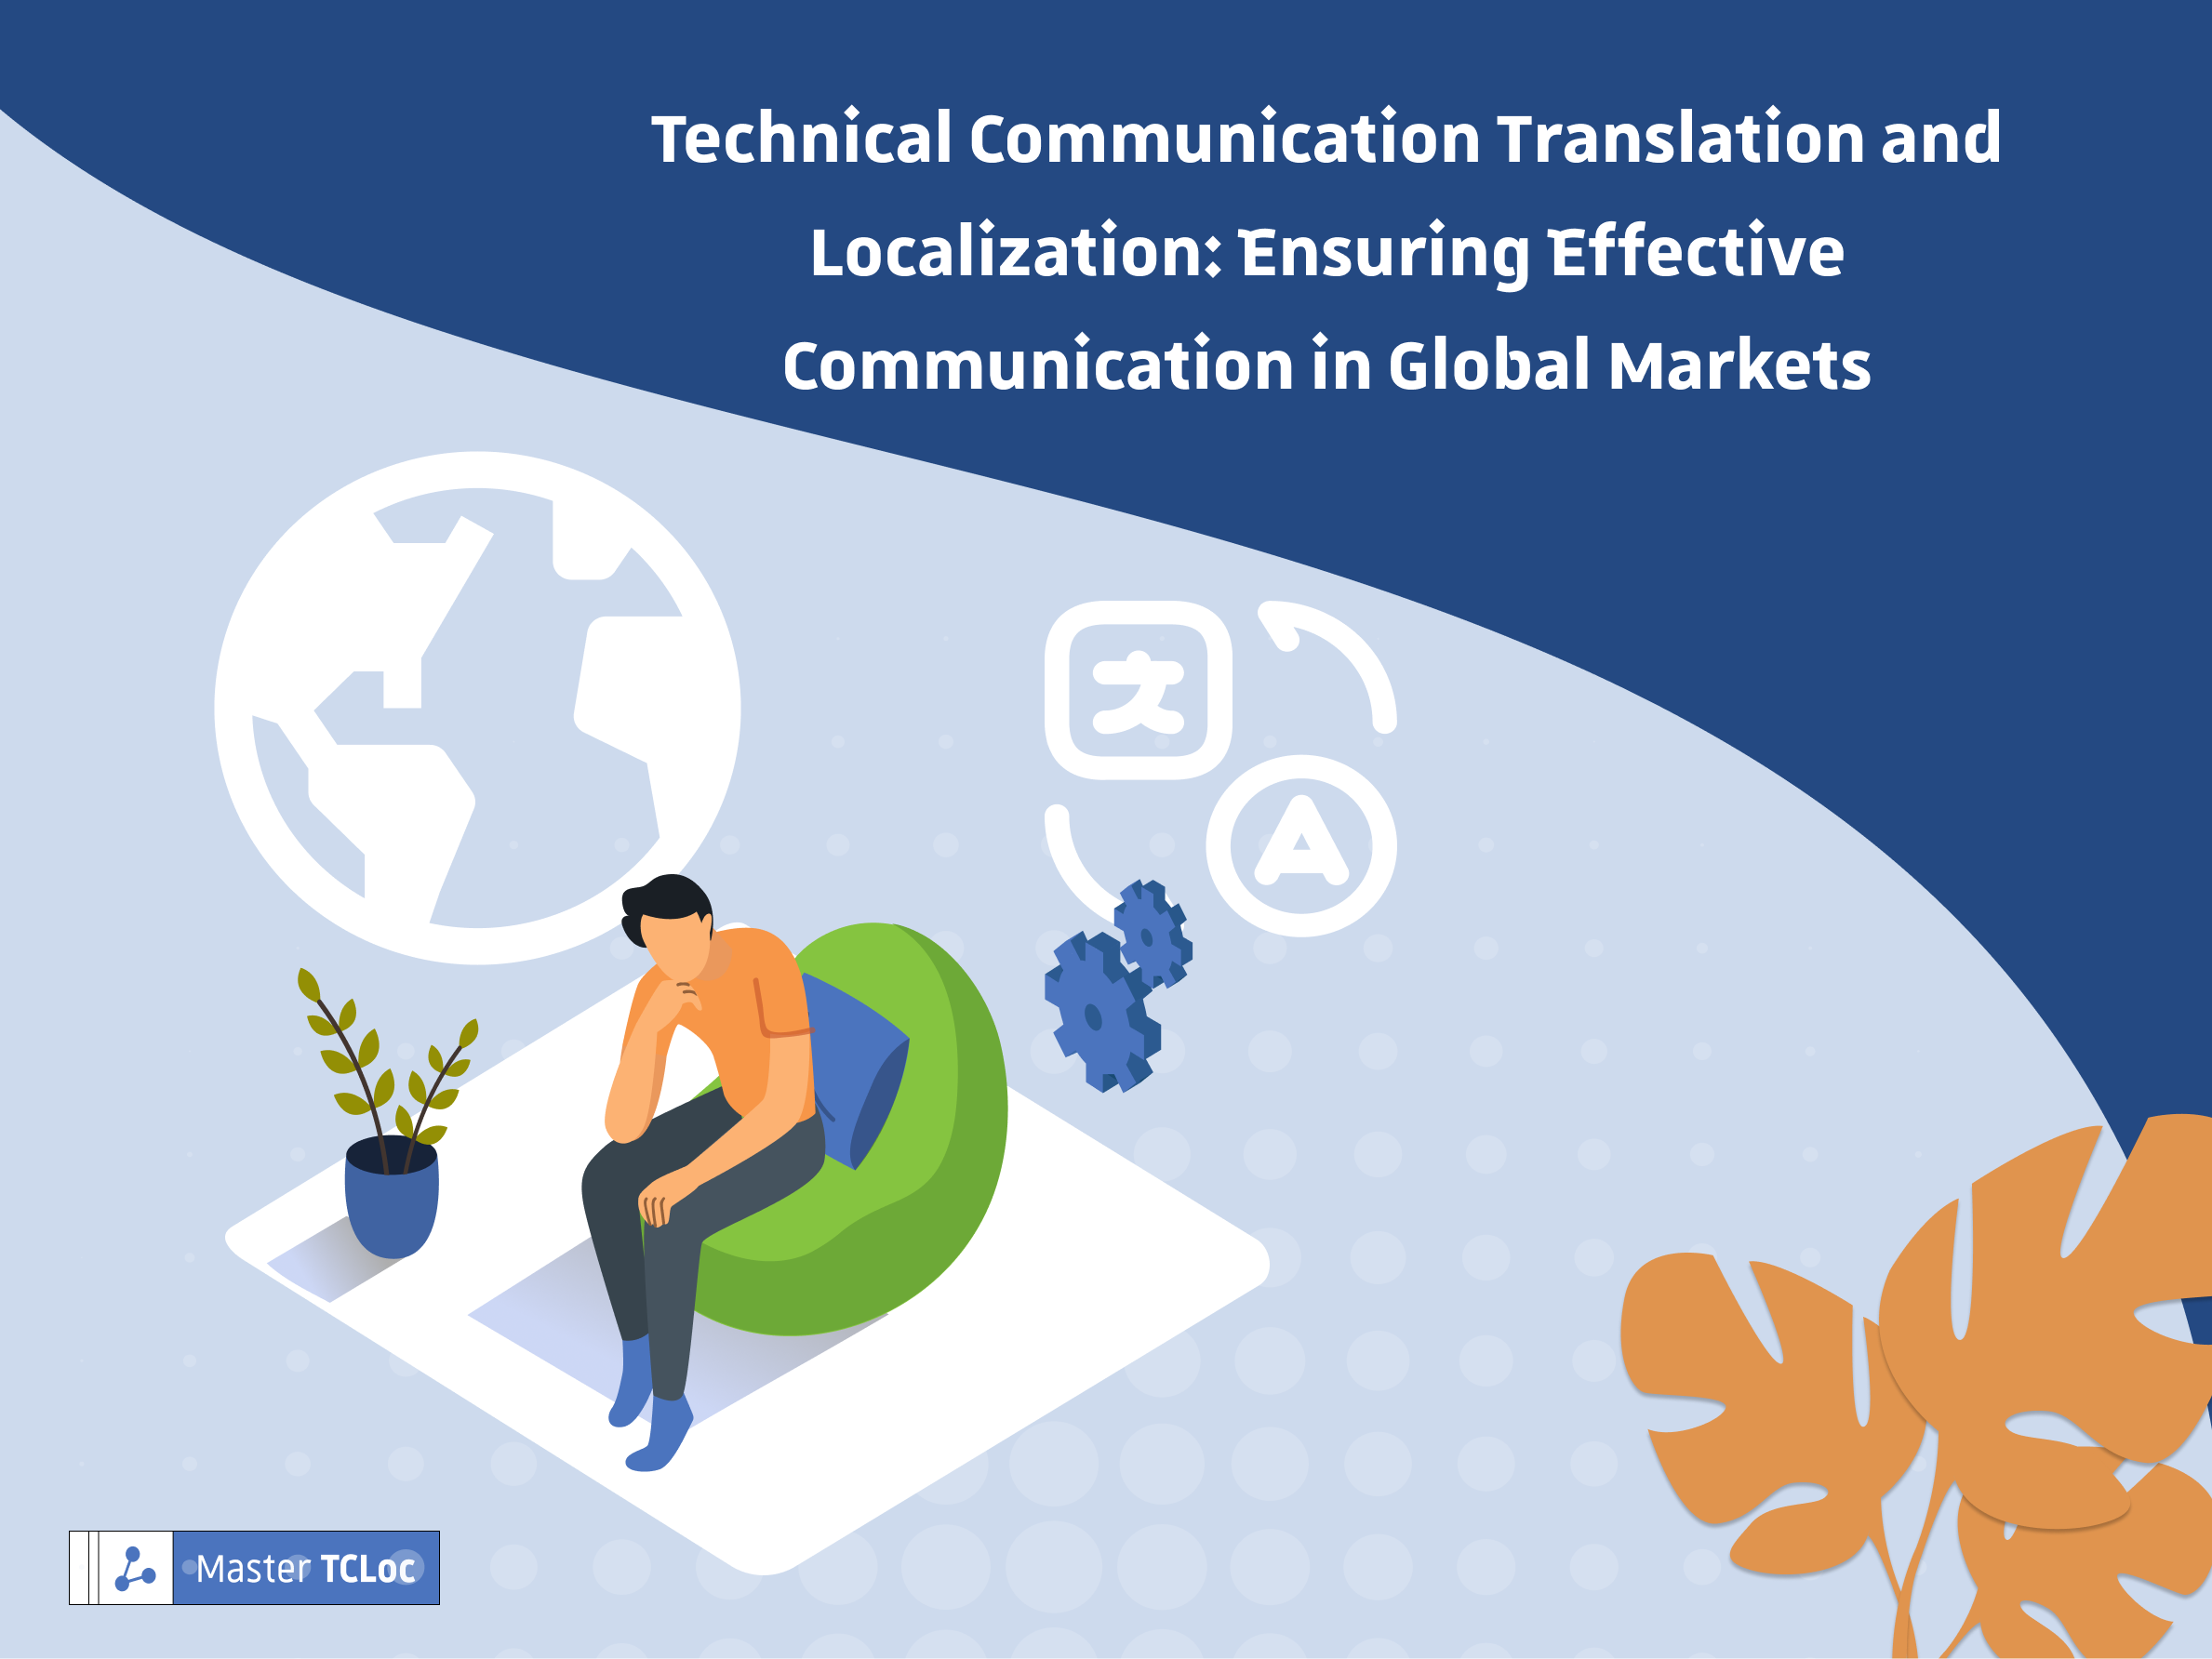 Technical Communication Translation and Localization: Ensuring Effective Communication in Global Markets